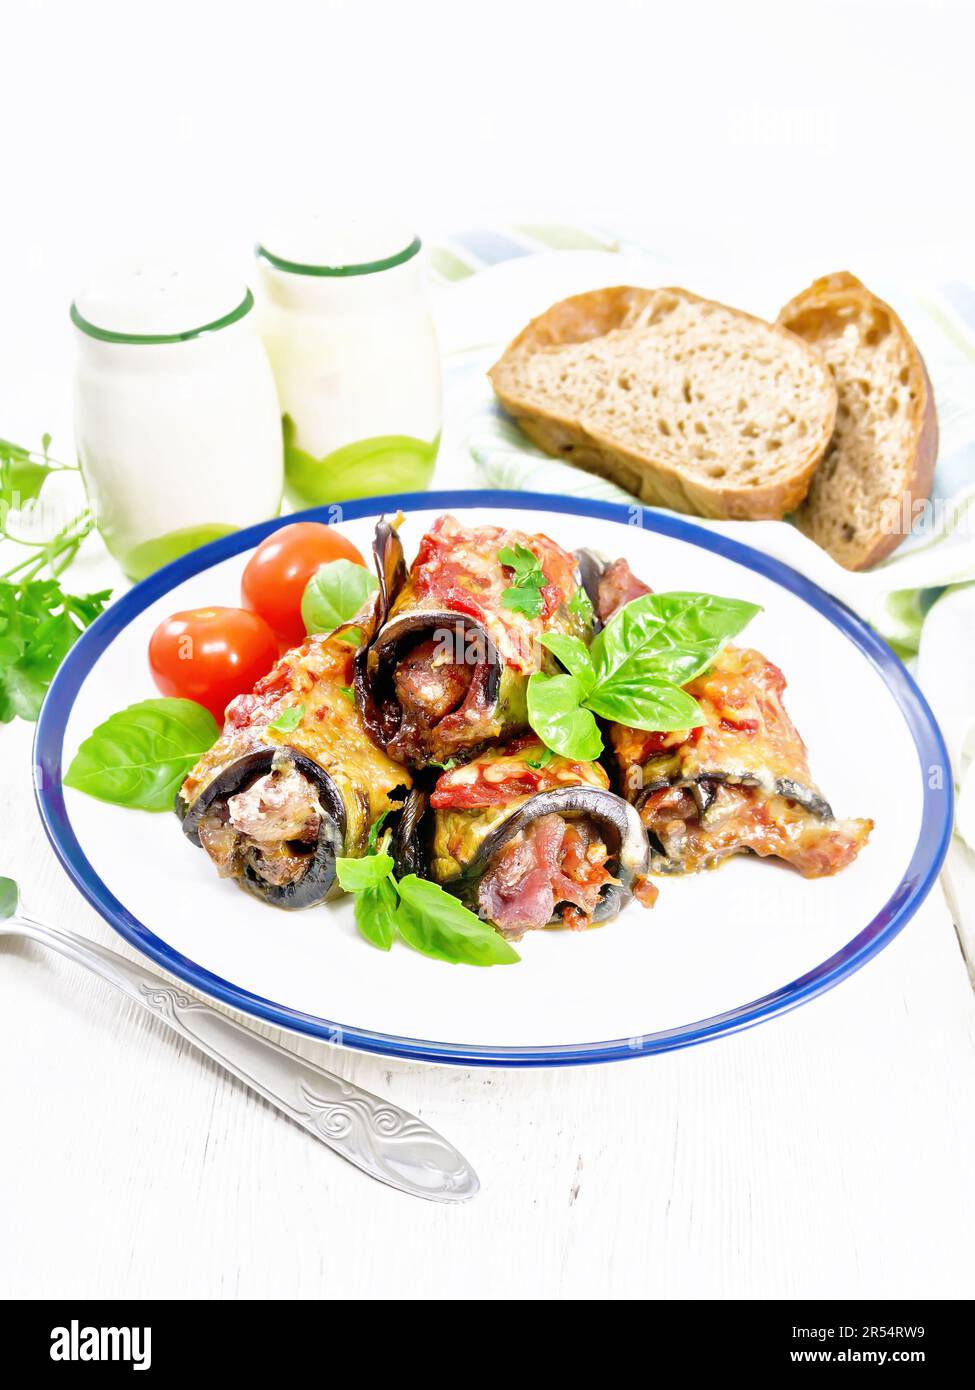 Baked eggplant rolls with meat, tomatoes and cheese in a plate, napkin, basil, bread and fork on a wooden board background Stock Photo